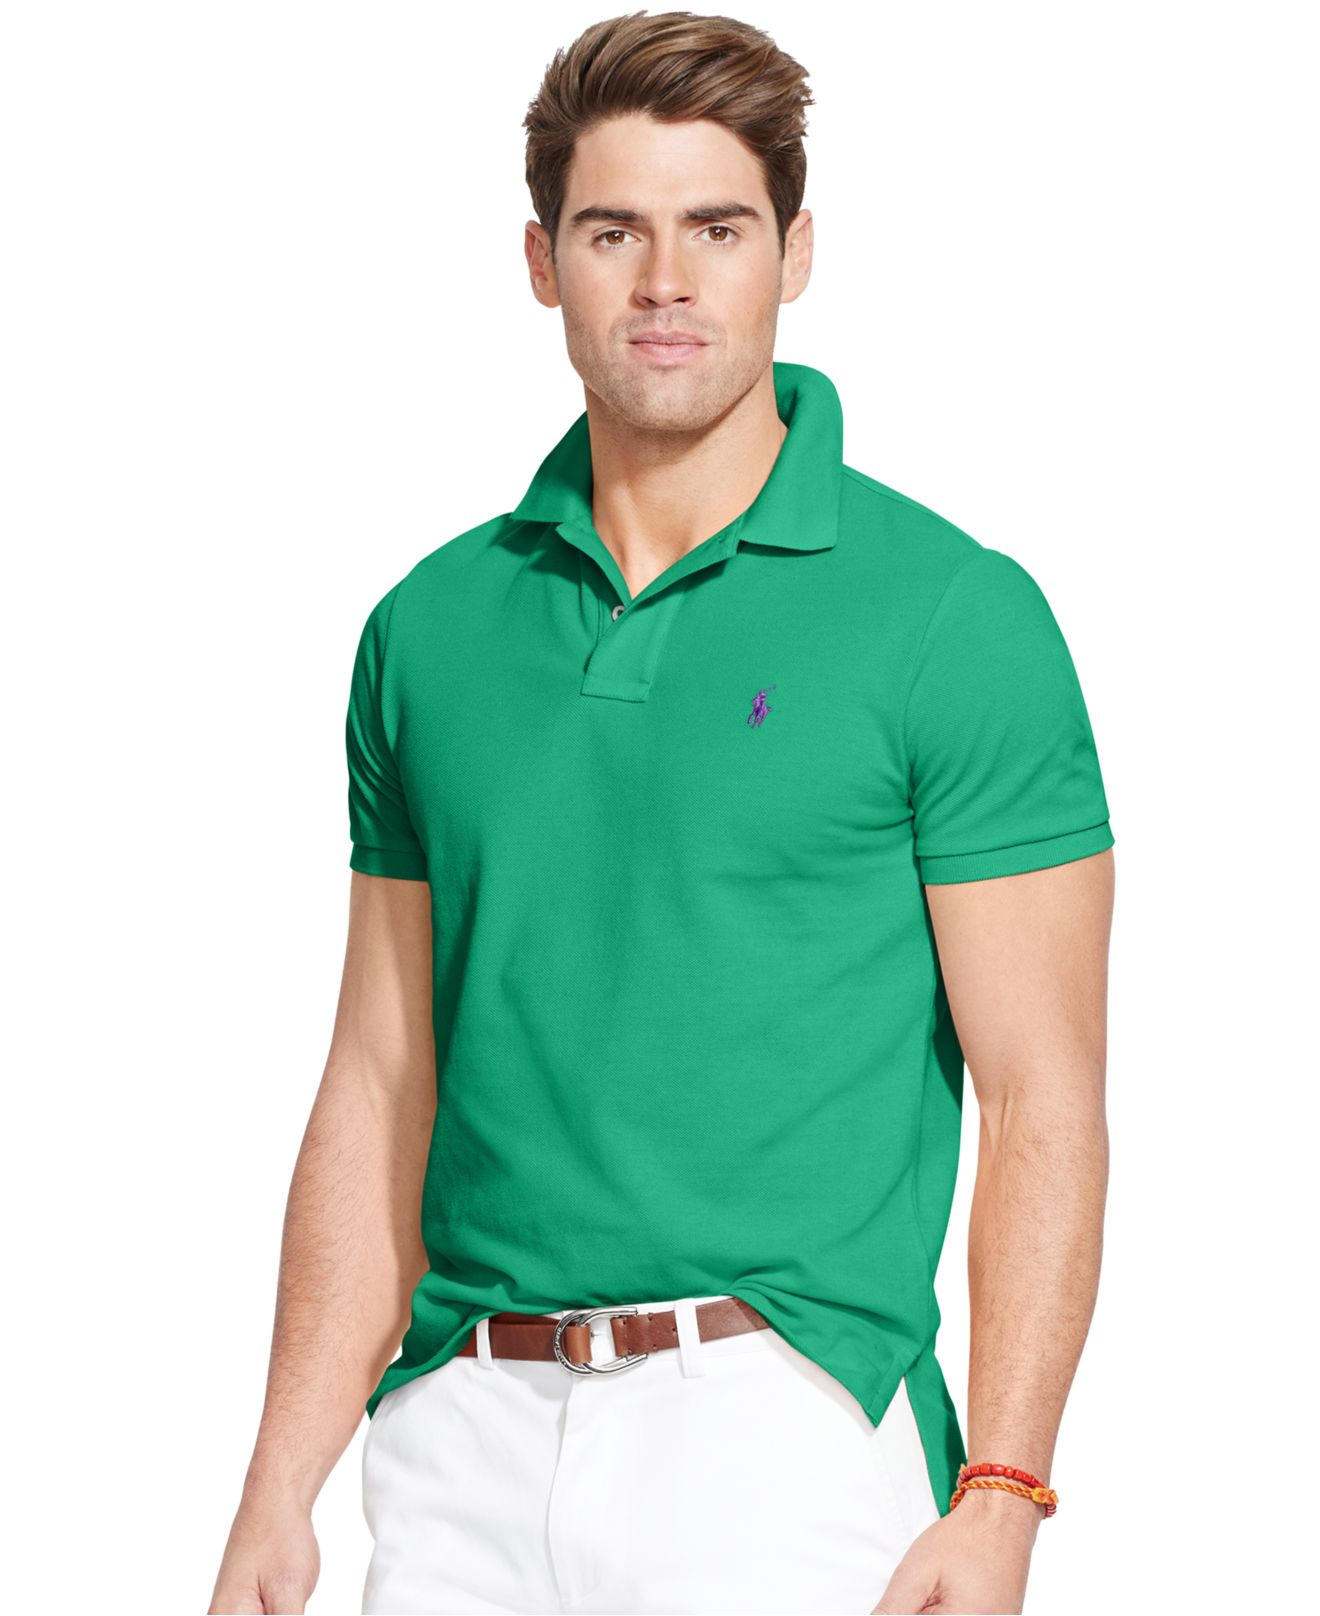 Lyst - Polo Ralph Lauren Classic-fit Mesh Polo in Green for Men